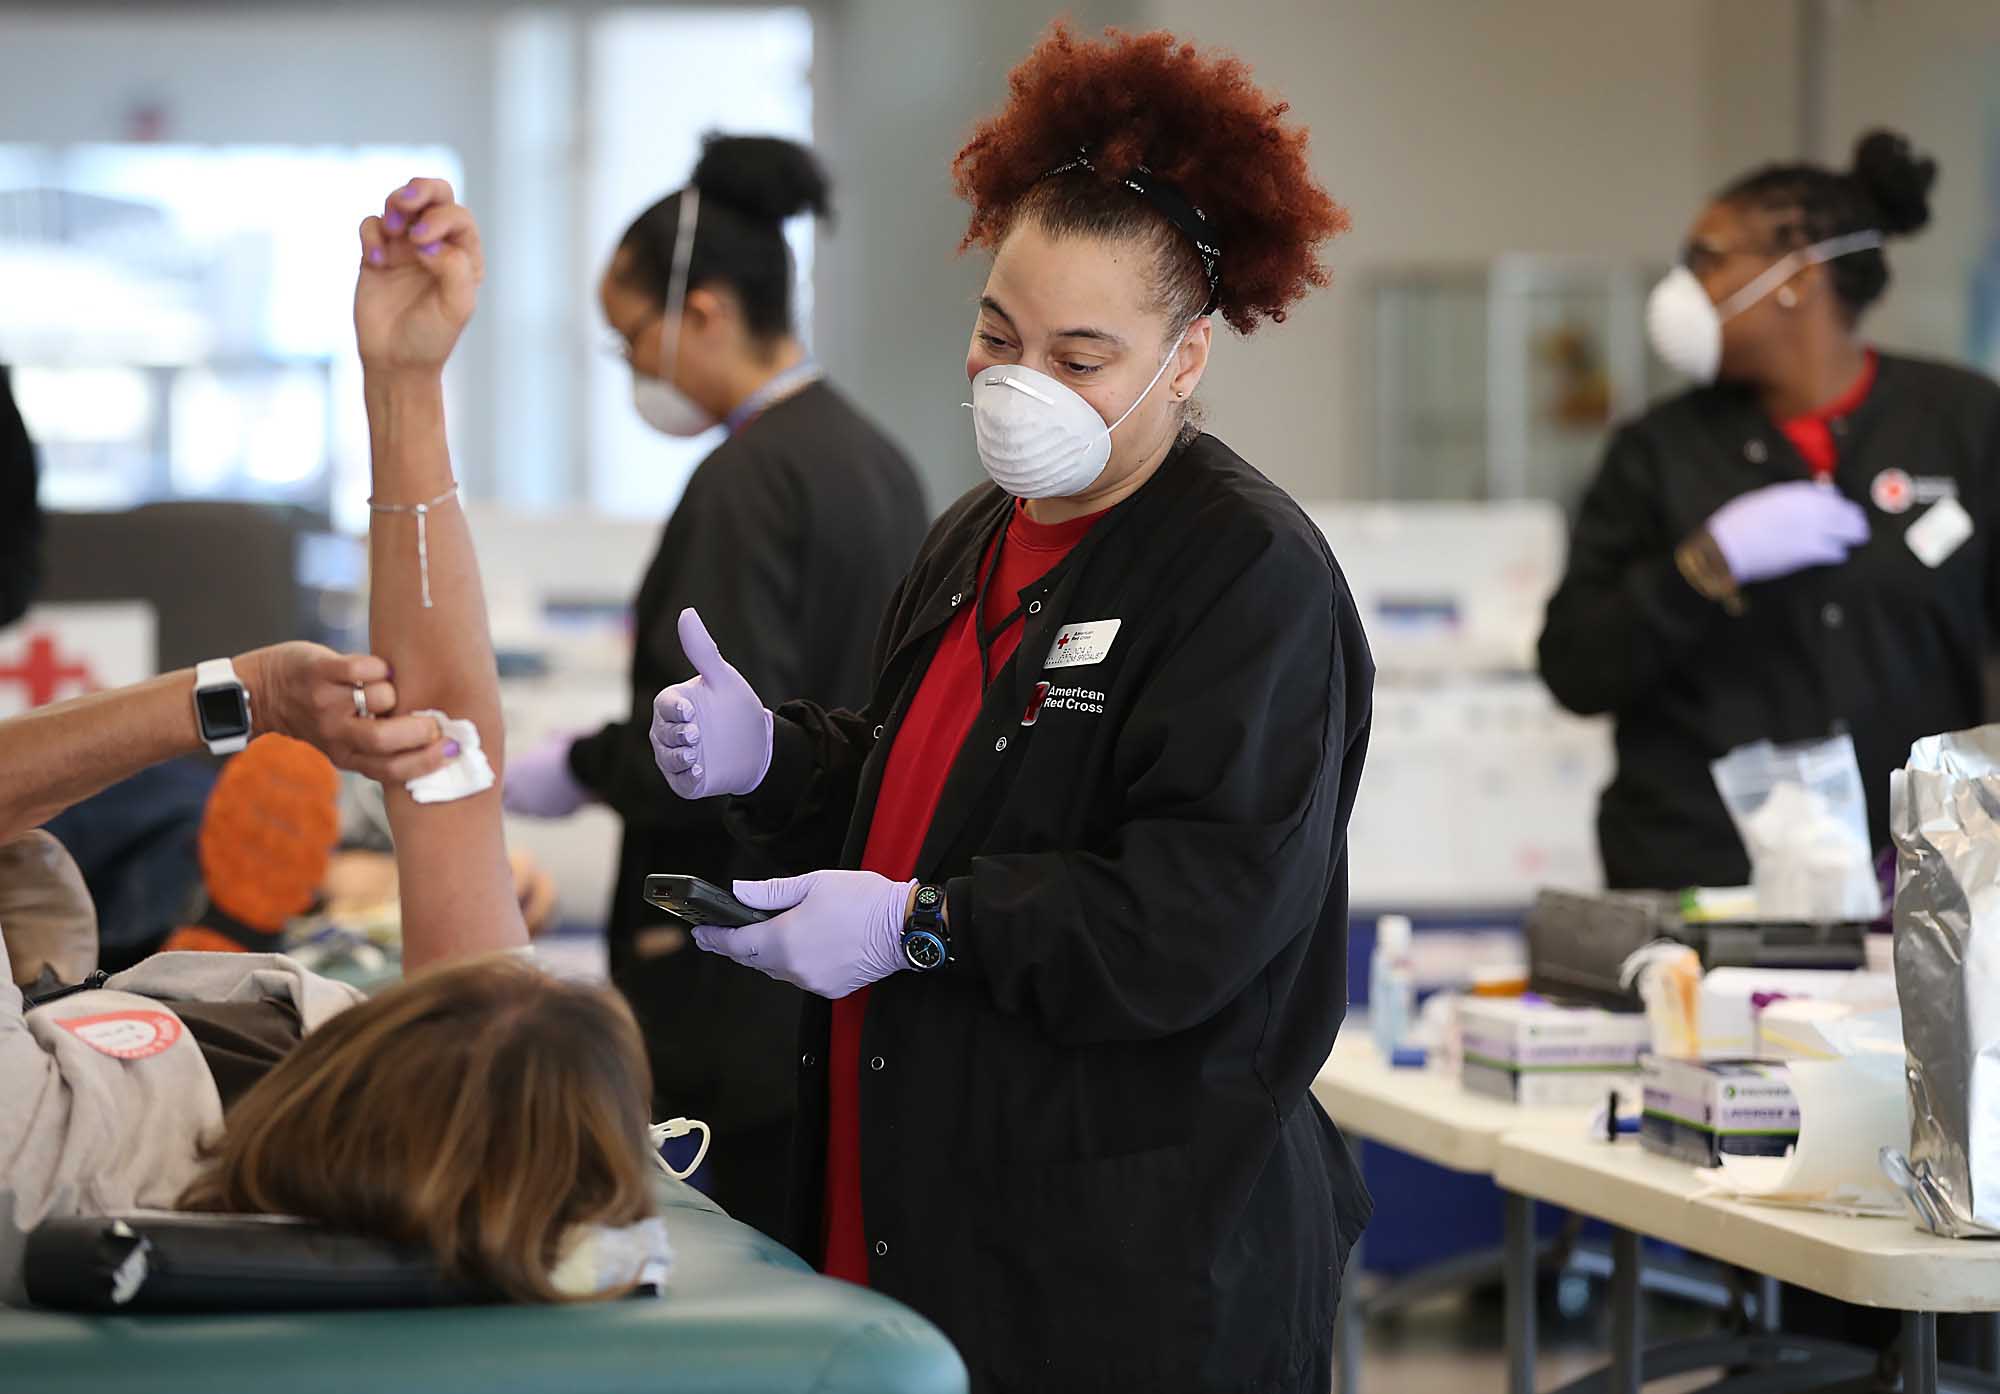 Belinda Ofilos, collection specialist, takes blood from a donor during a blood drive by the American Red Cross on March 31 in Norwood, Massachusetts.